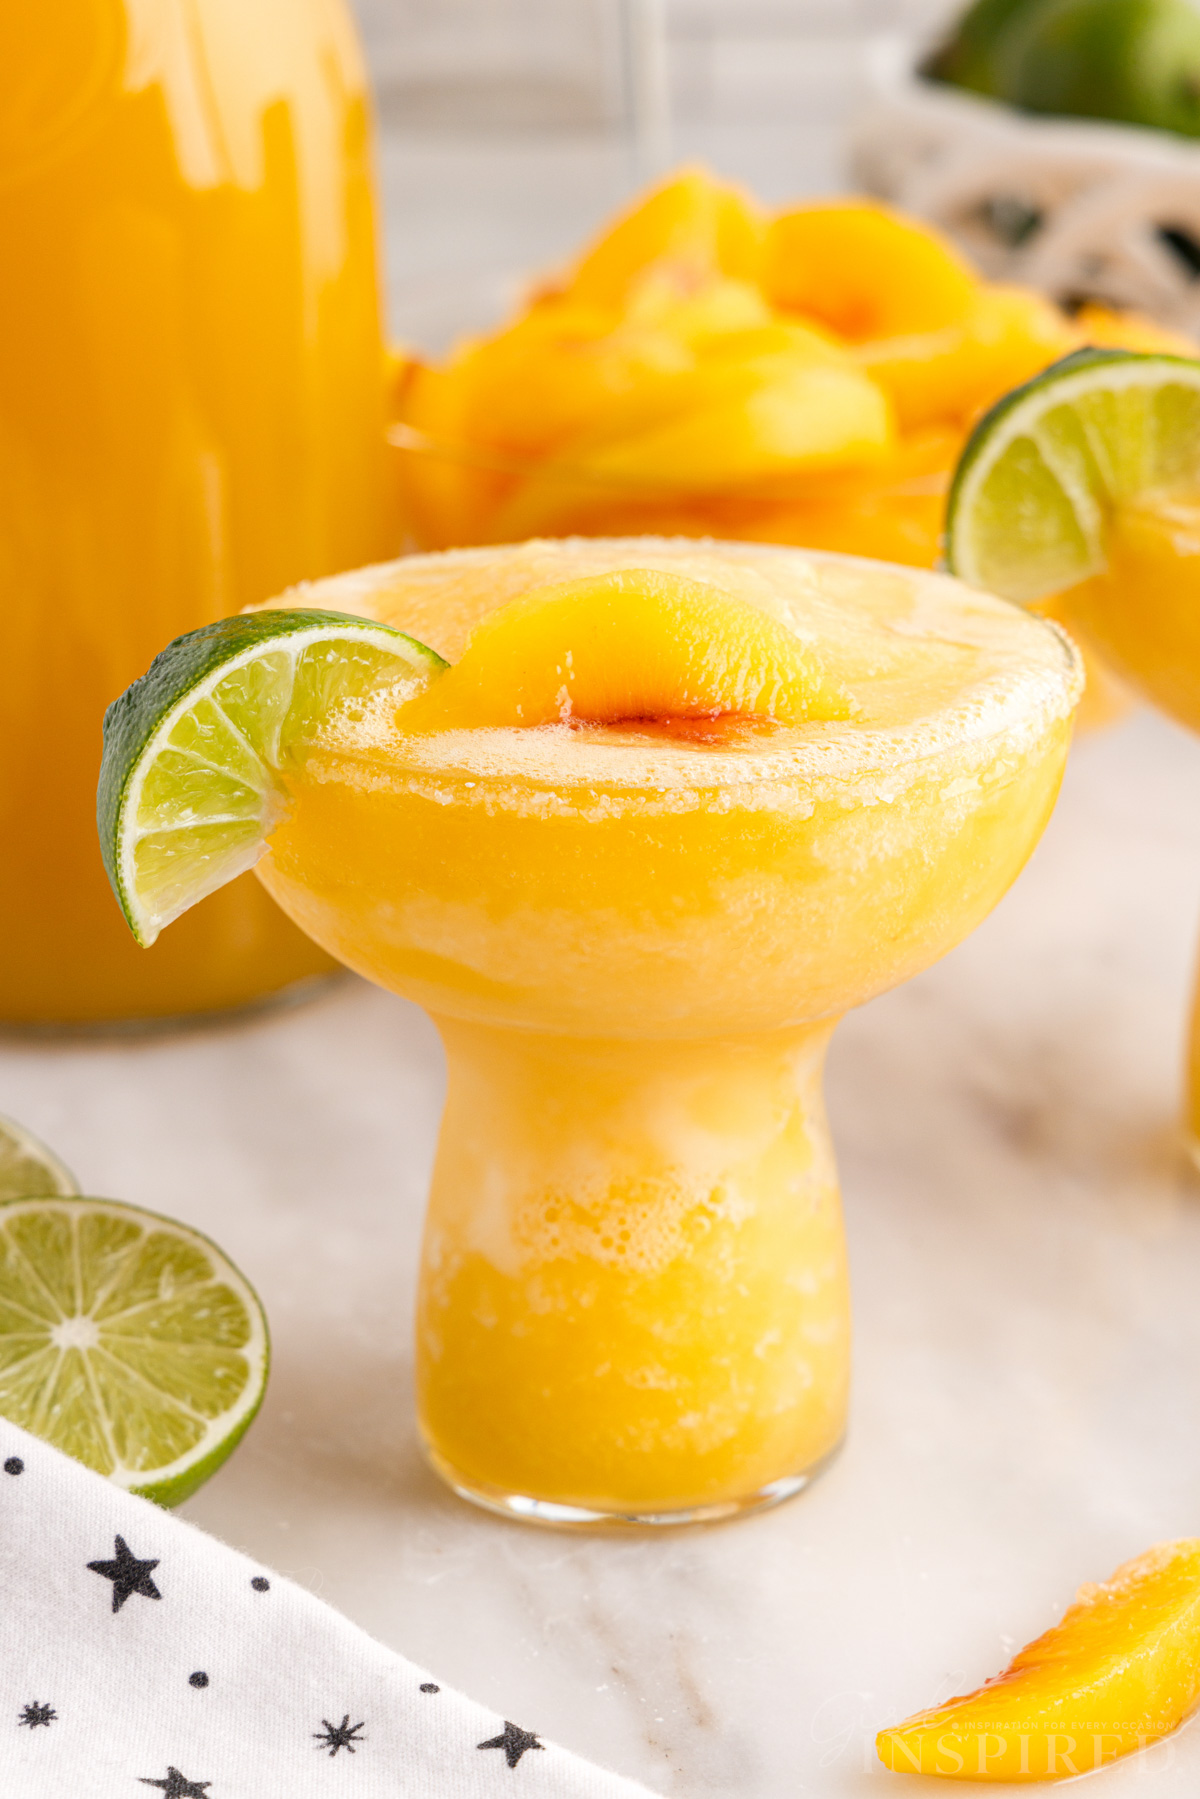 frozen peach margarita garnished with a lime wedge, bowl of peaches, and jar of peach juice.